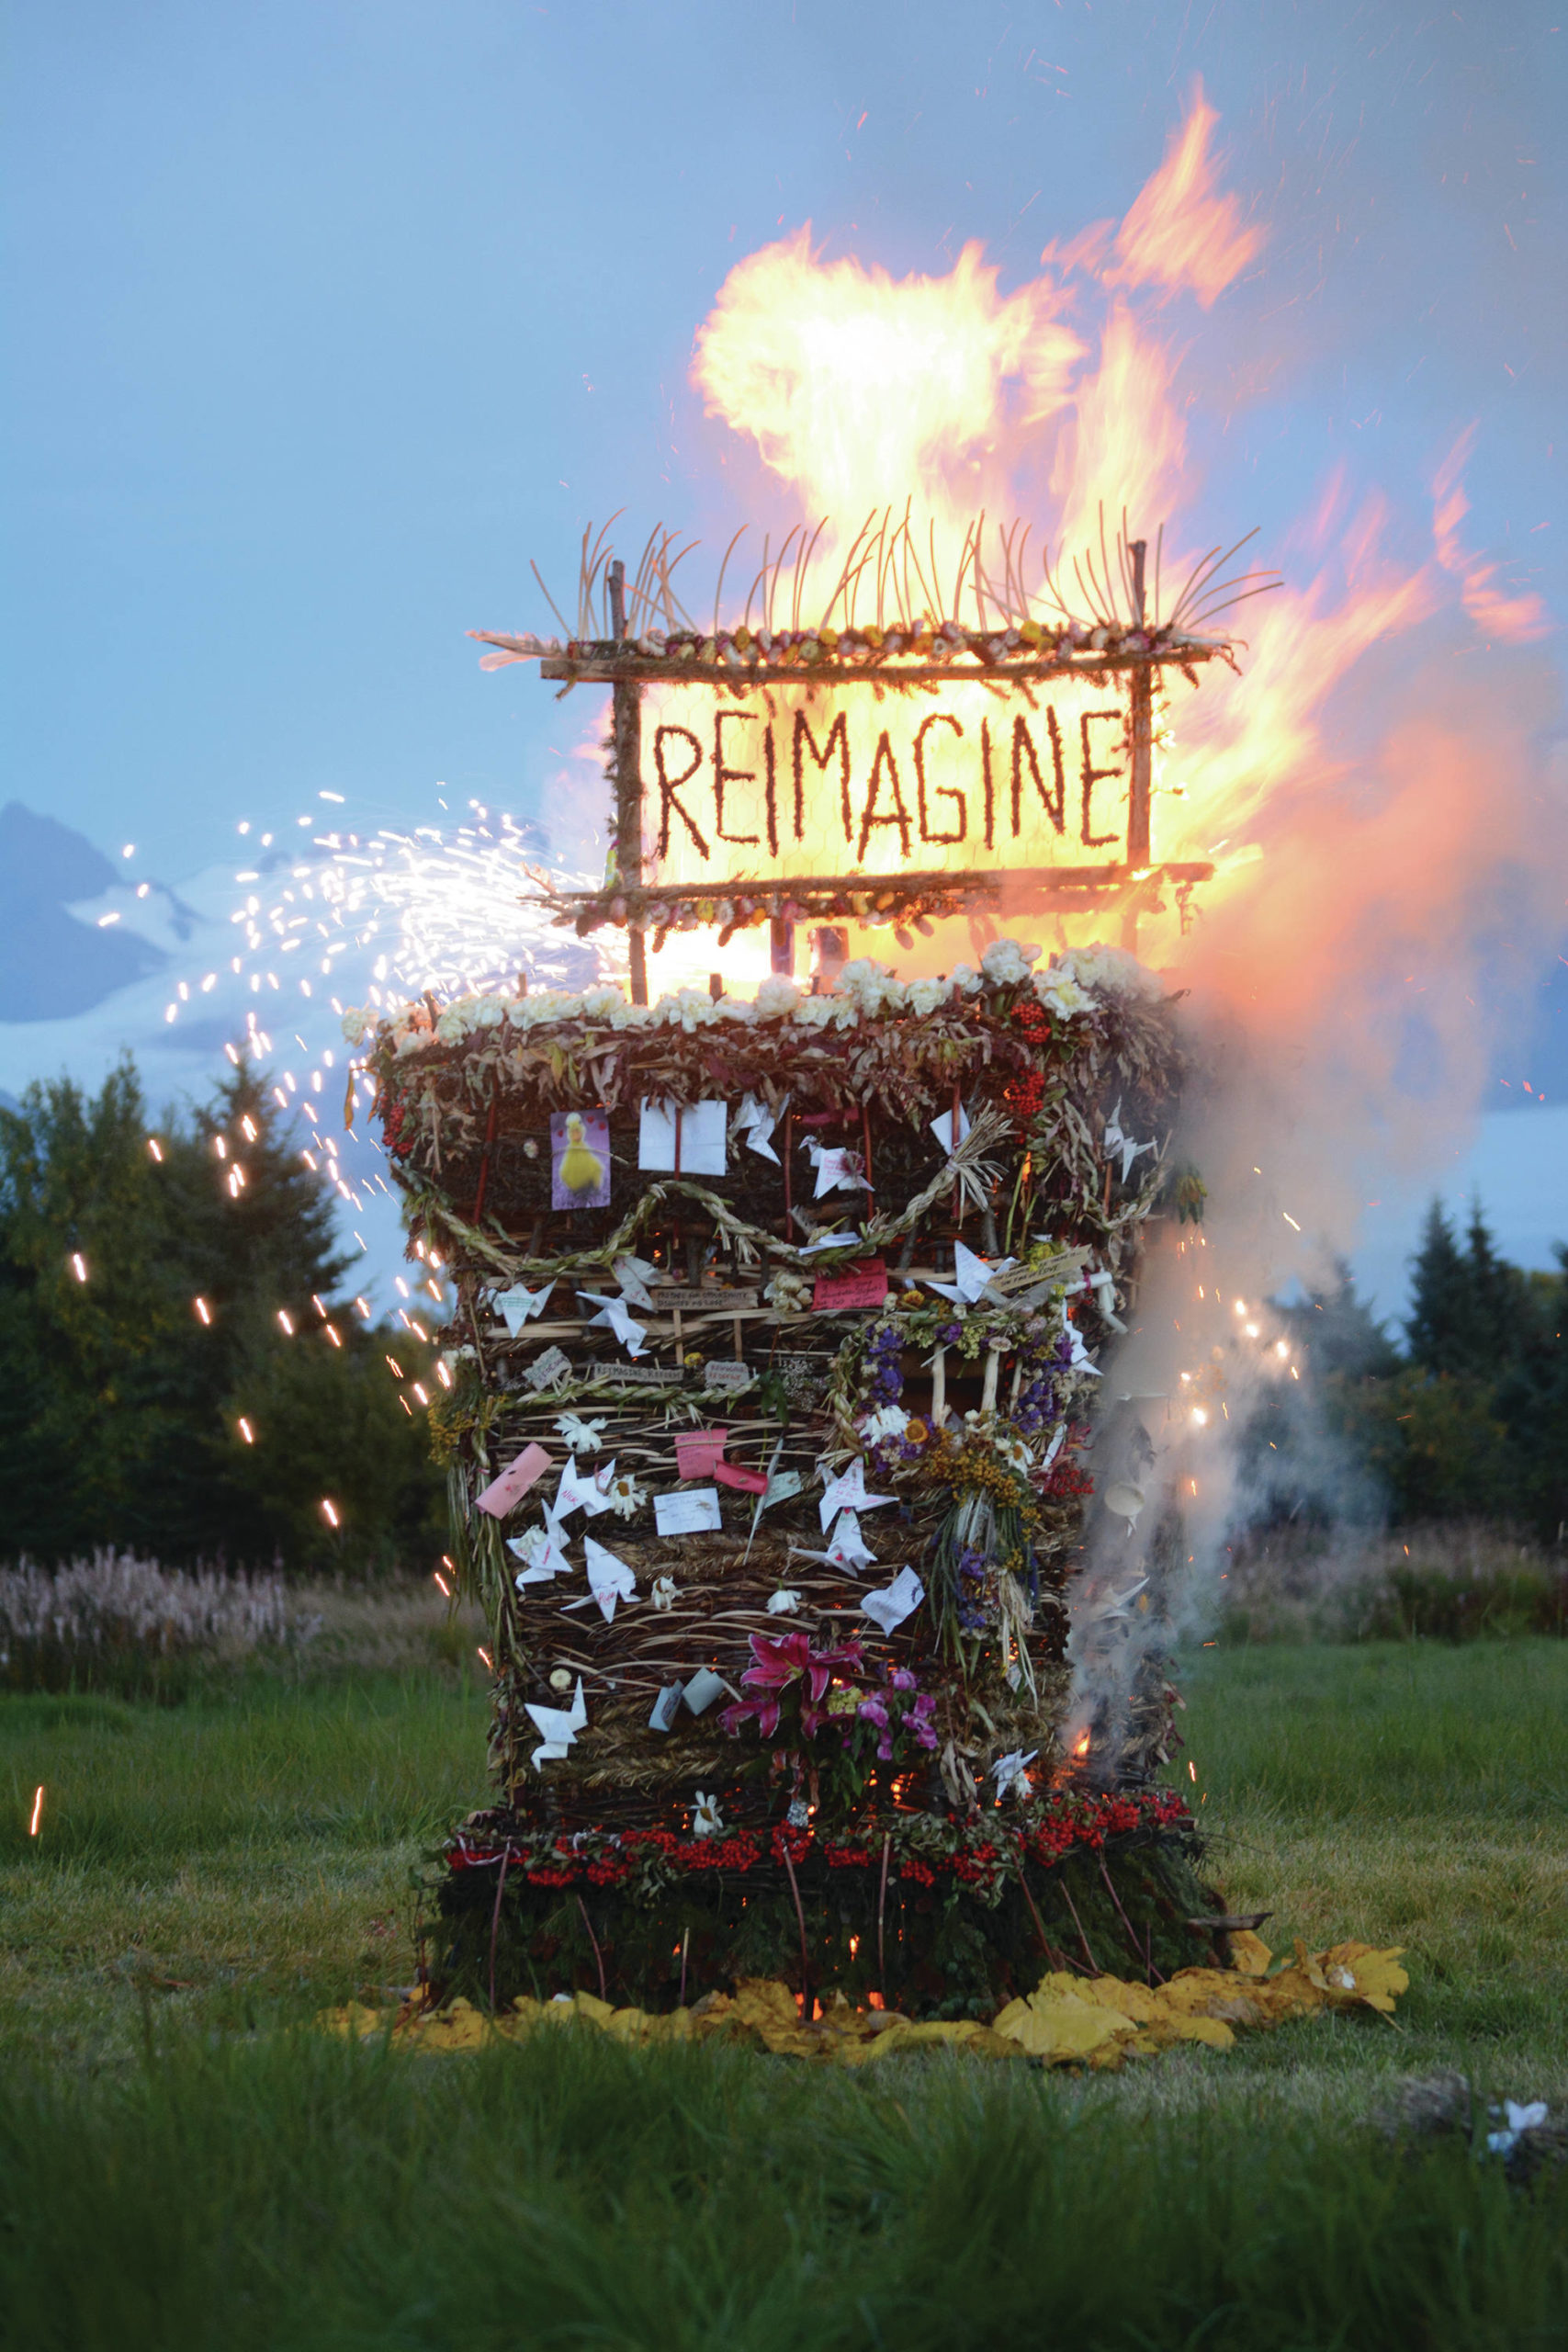 “Reimagine,” the 17th annual Burning Basket, catches fire in a field on Sunday, Sept. 13, 2020, near Homer, Alaska. Artist Mavis Muller intended to broadcast live on Facebook and YouTube the burning of the basket, but because of technical difficulties that didn’t happen. “Burning Basket teaches how to let go of expectations and accept the present moment,” Muller wrote in a text message. “Technology is fickle. The basket, however, did exactly what it promised to do. It helod our collective burderns, our memorials, our joys, sadness, fear, and dispersed all of our good intentions in a plume of smoke, sparks and flames.” (Photo by Michael Armstrong/Homer News)